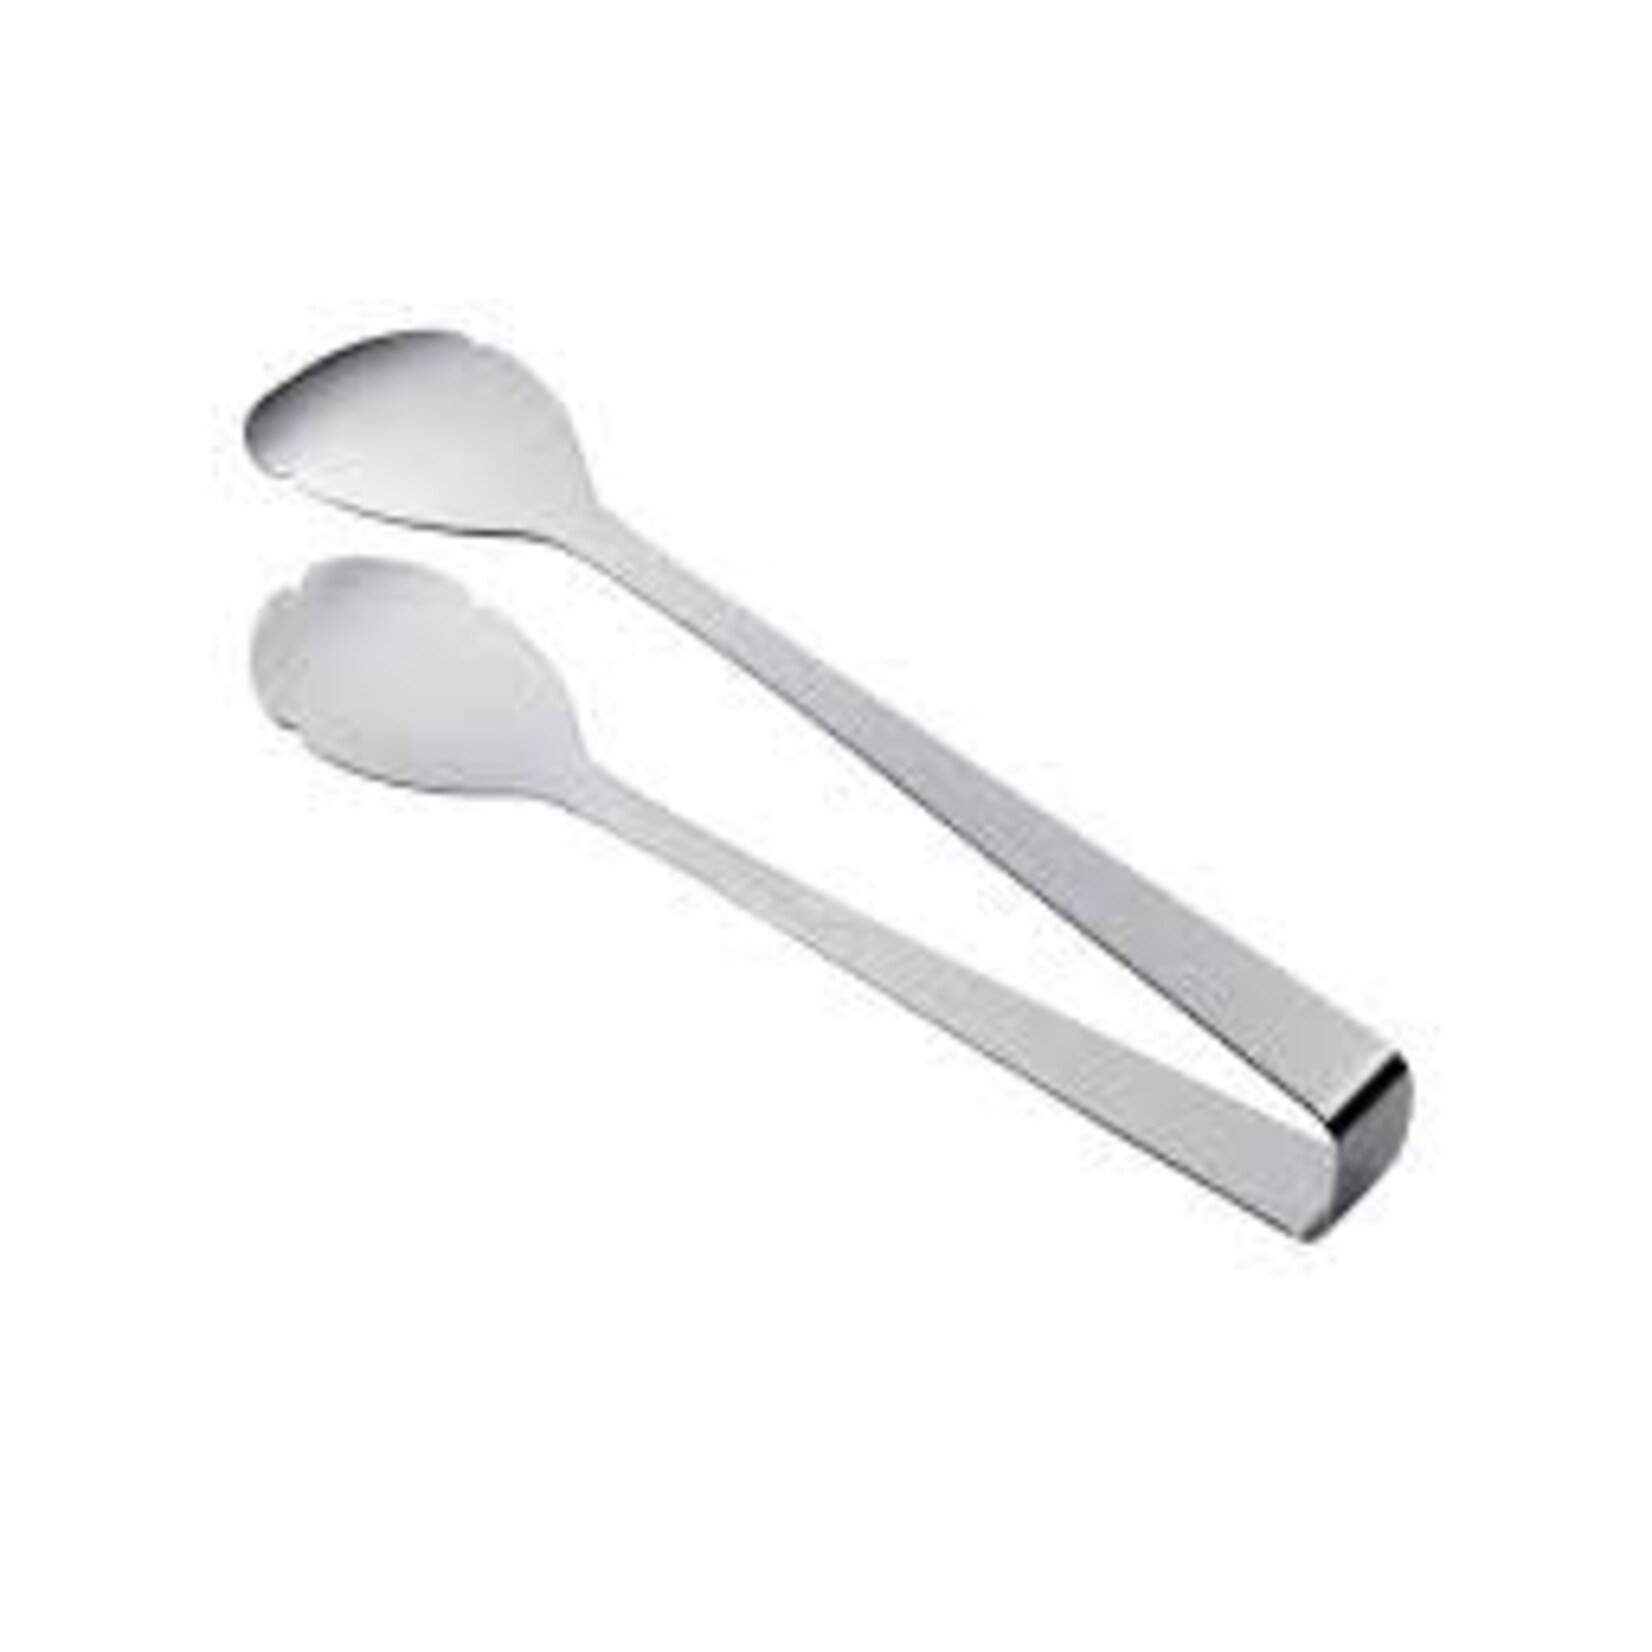 Corby Hall KS0045 Corby Oslo  8" serving tong 6/case